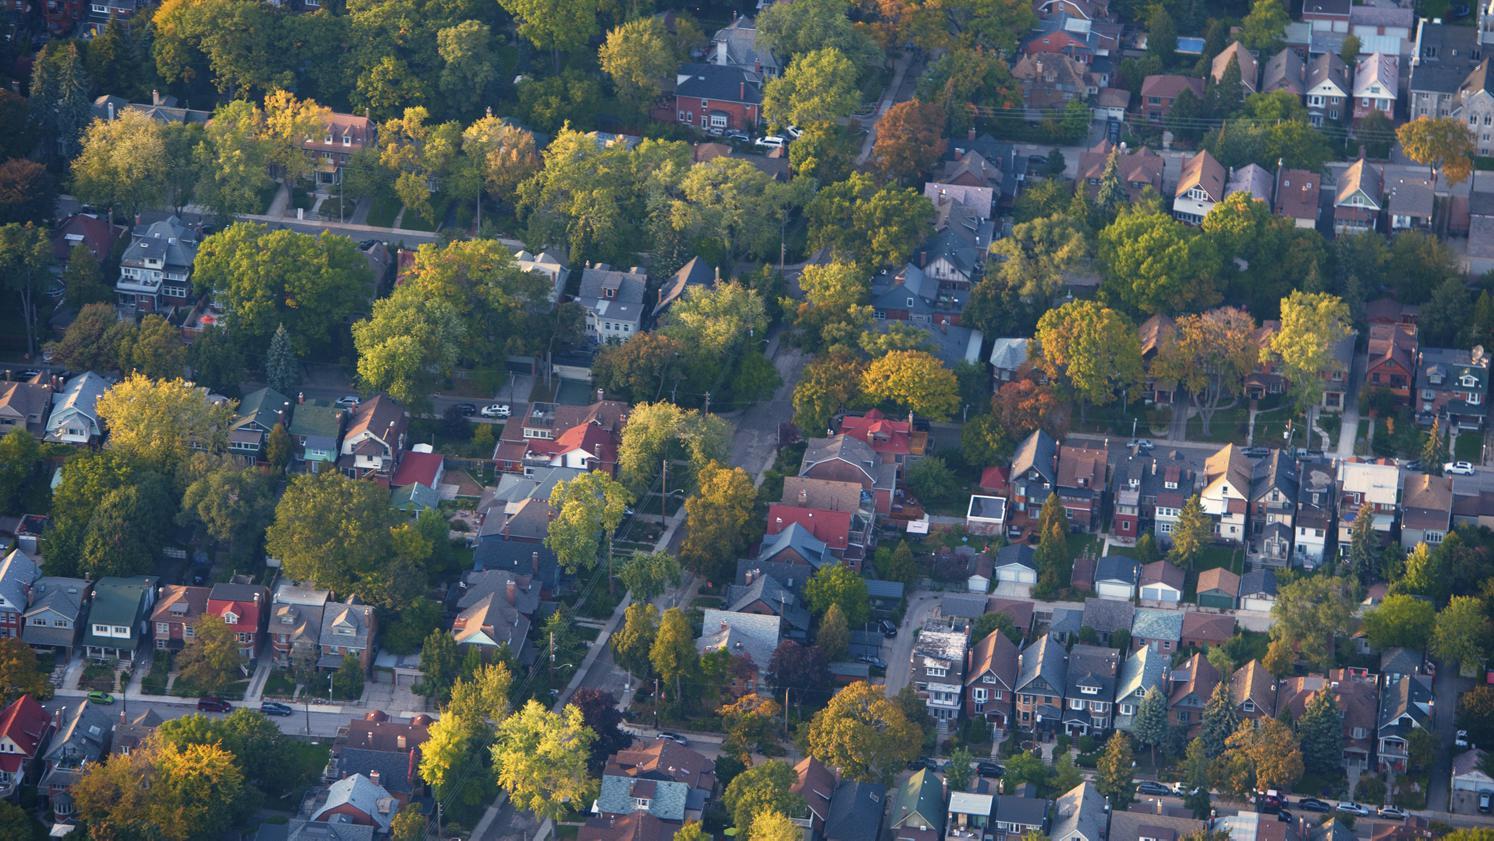 An aerial view of tree-lined, residential streets